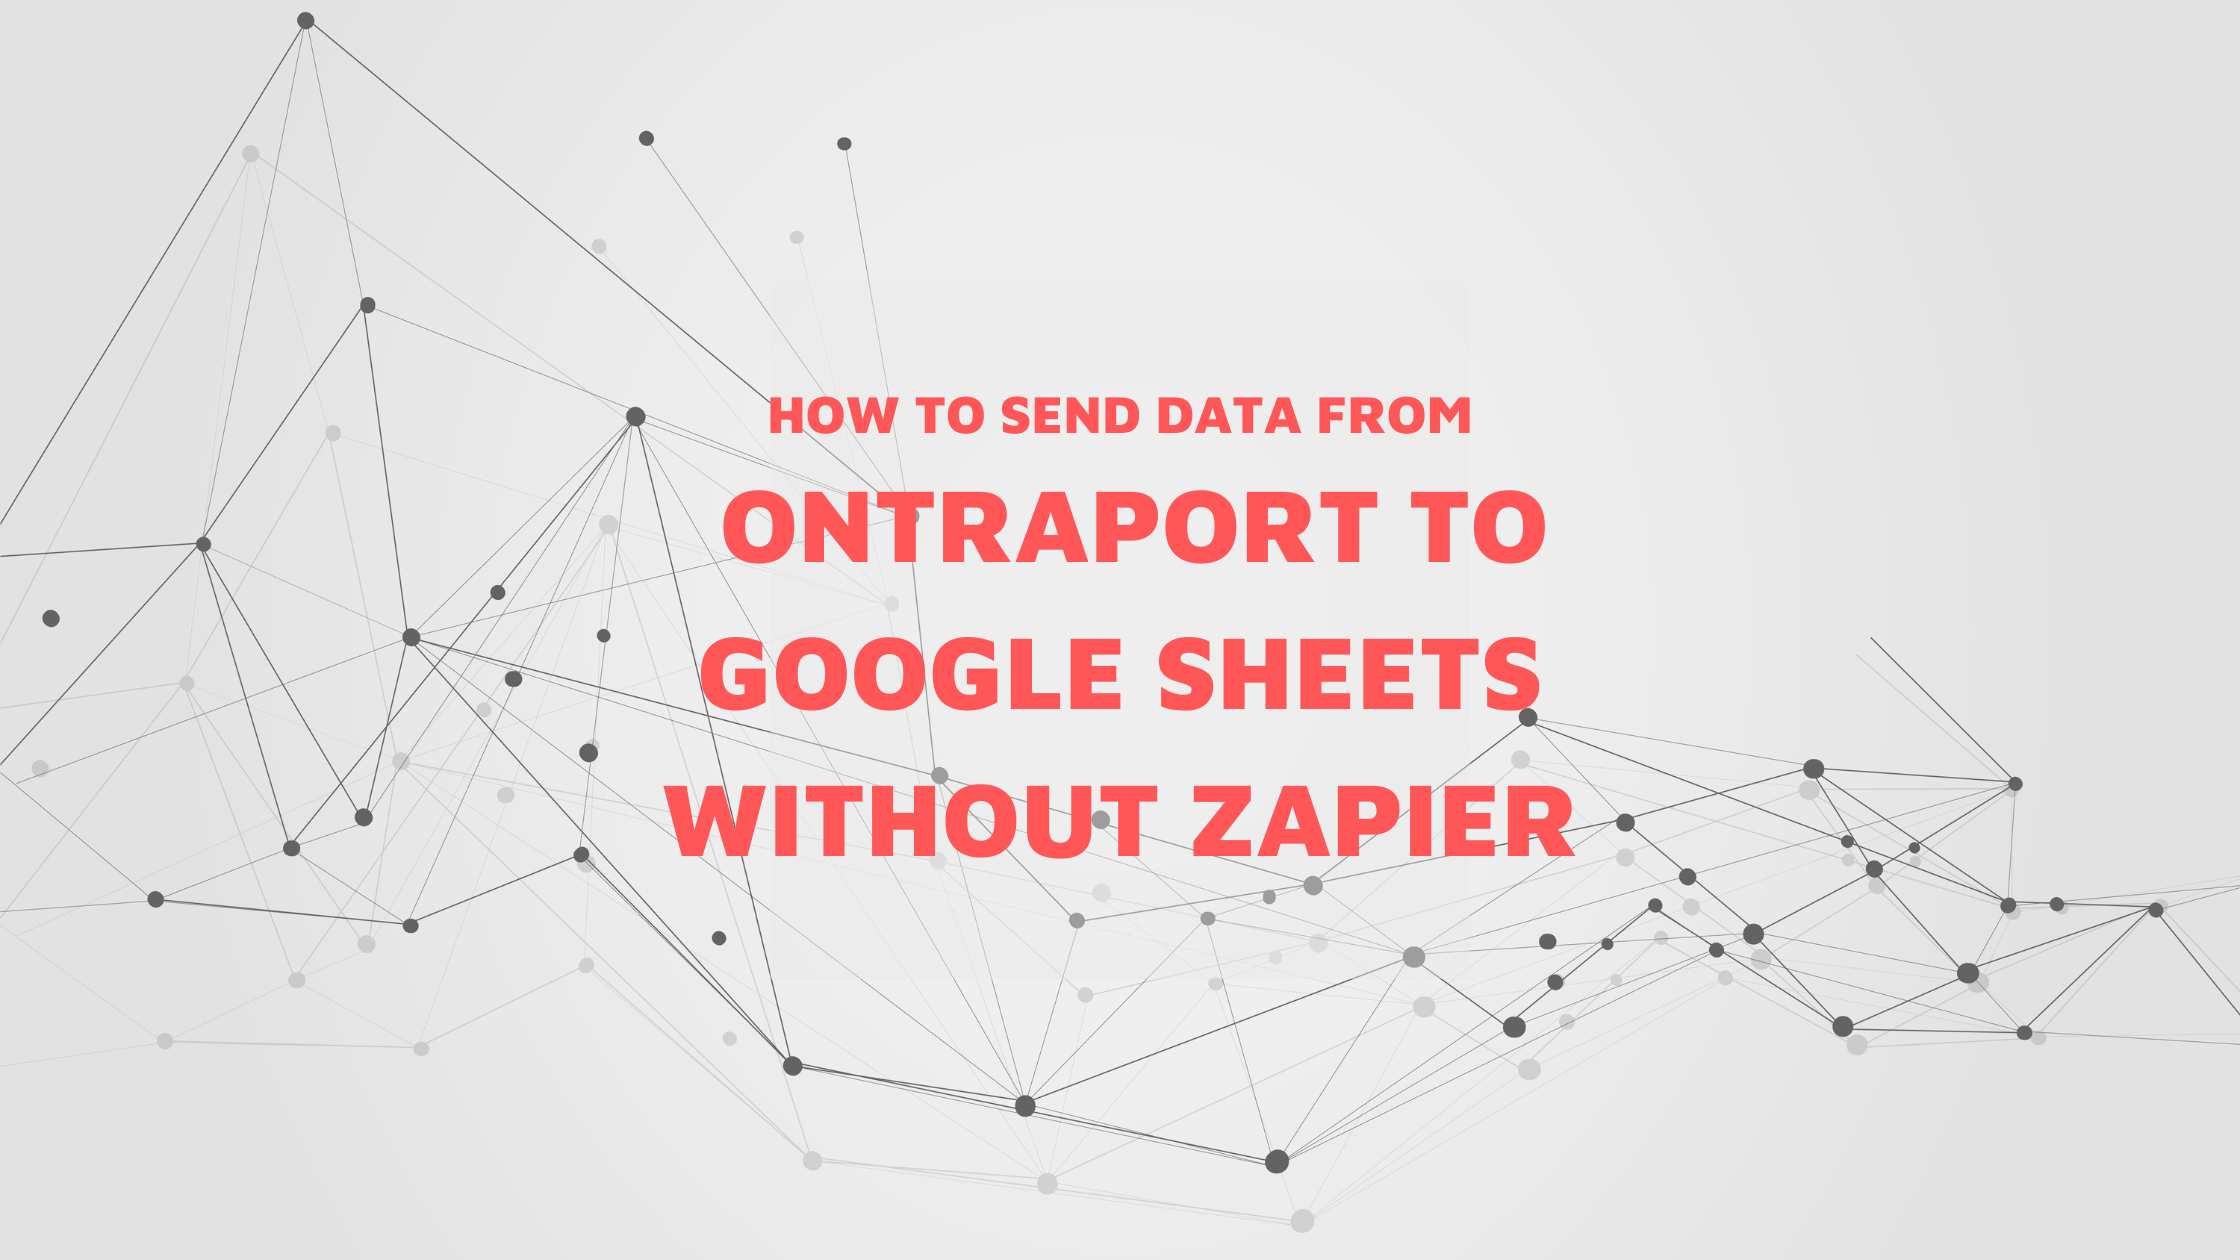 How to send data from Ontraport to Google Sheets without Zapier